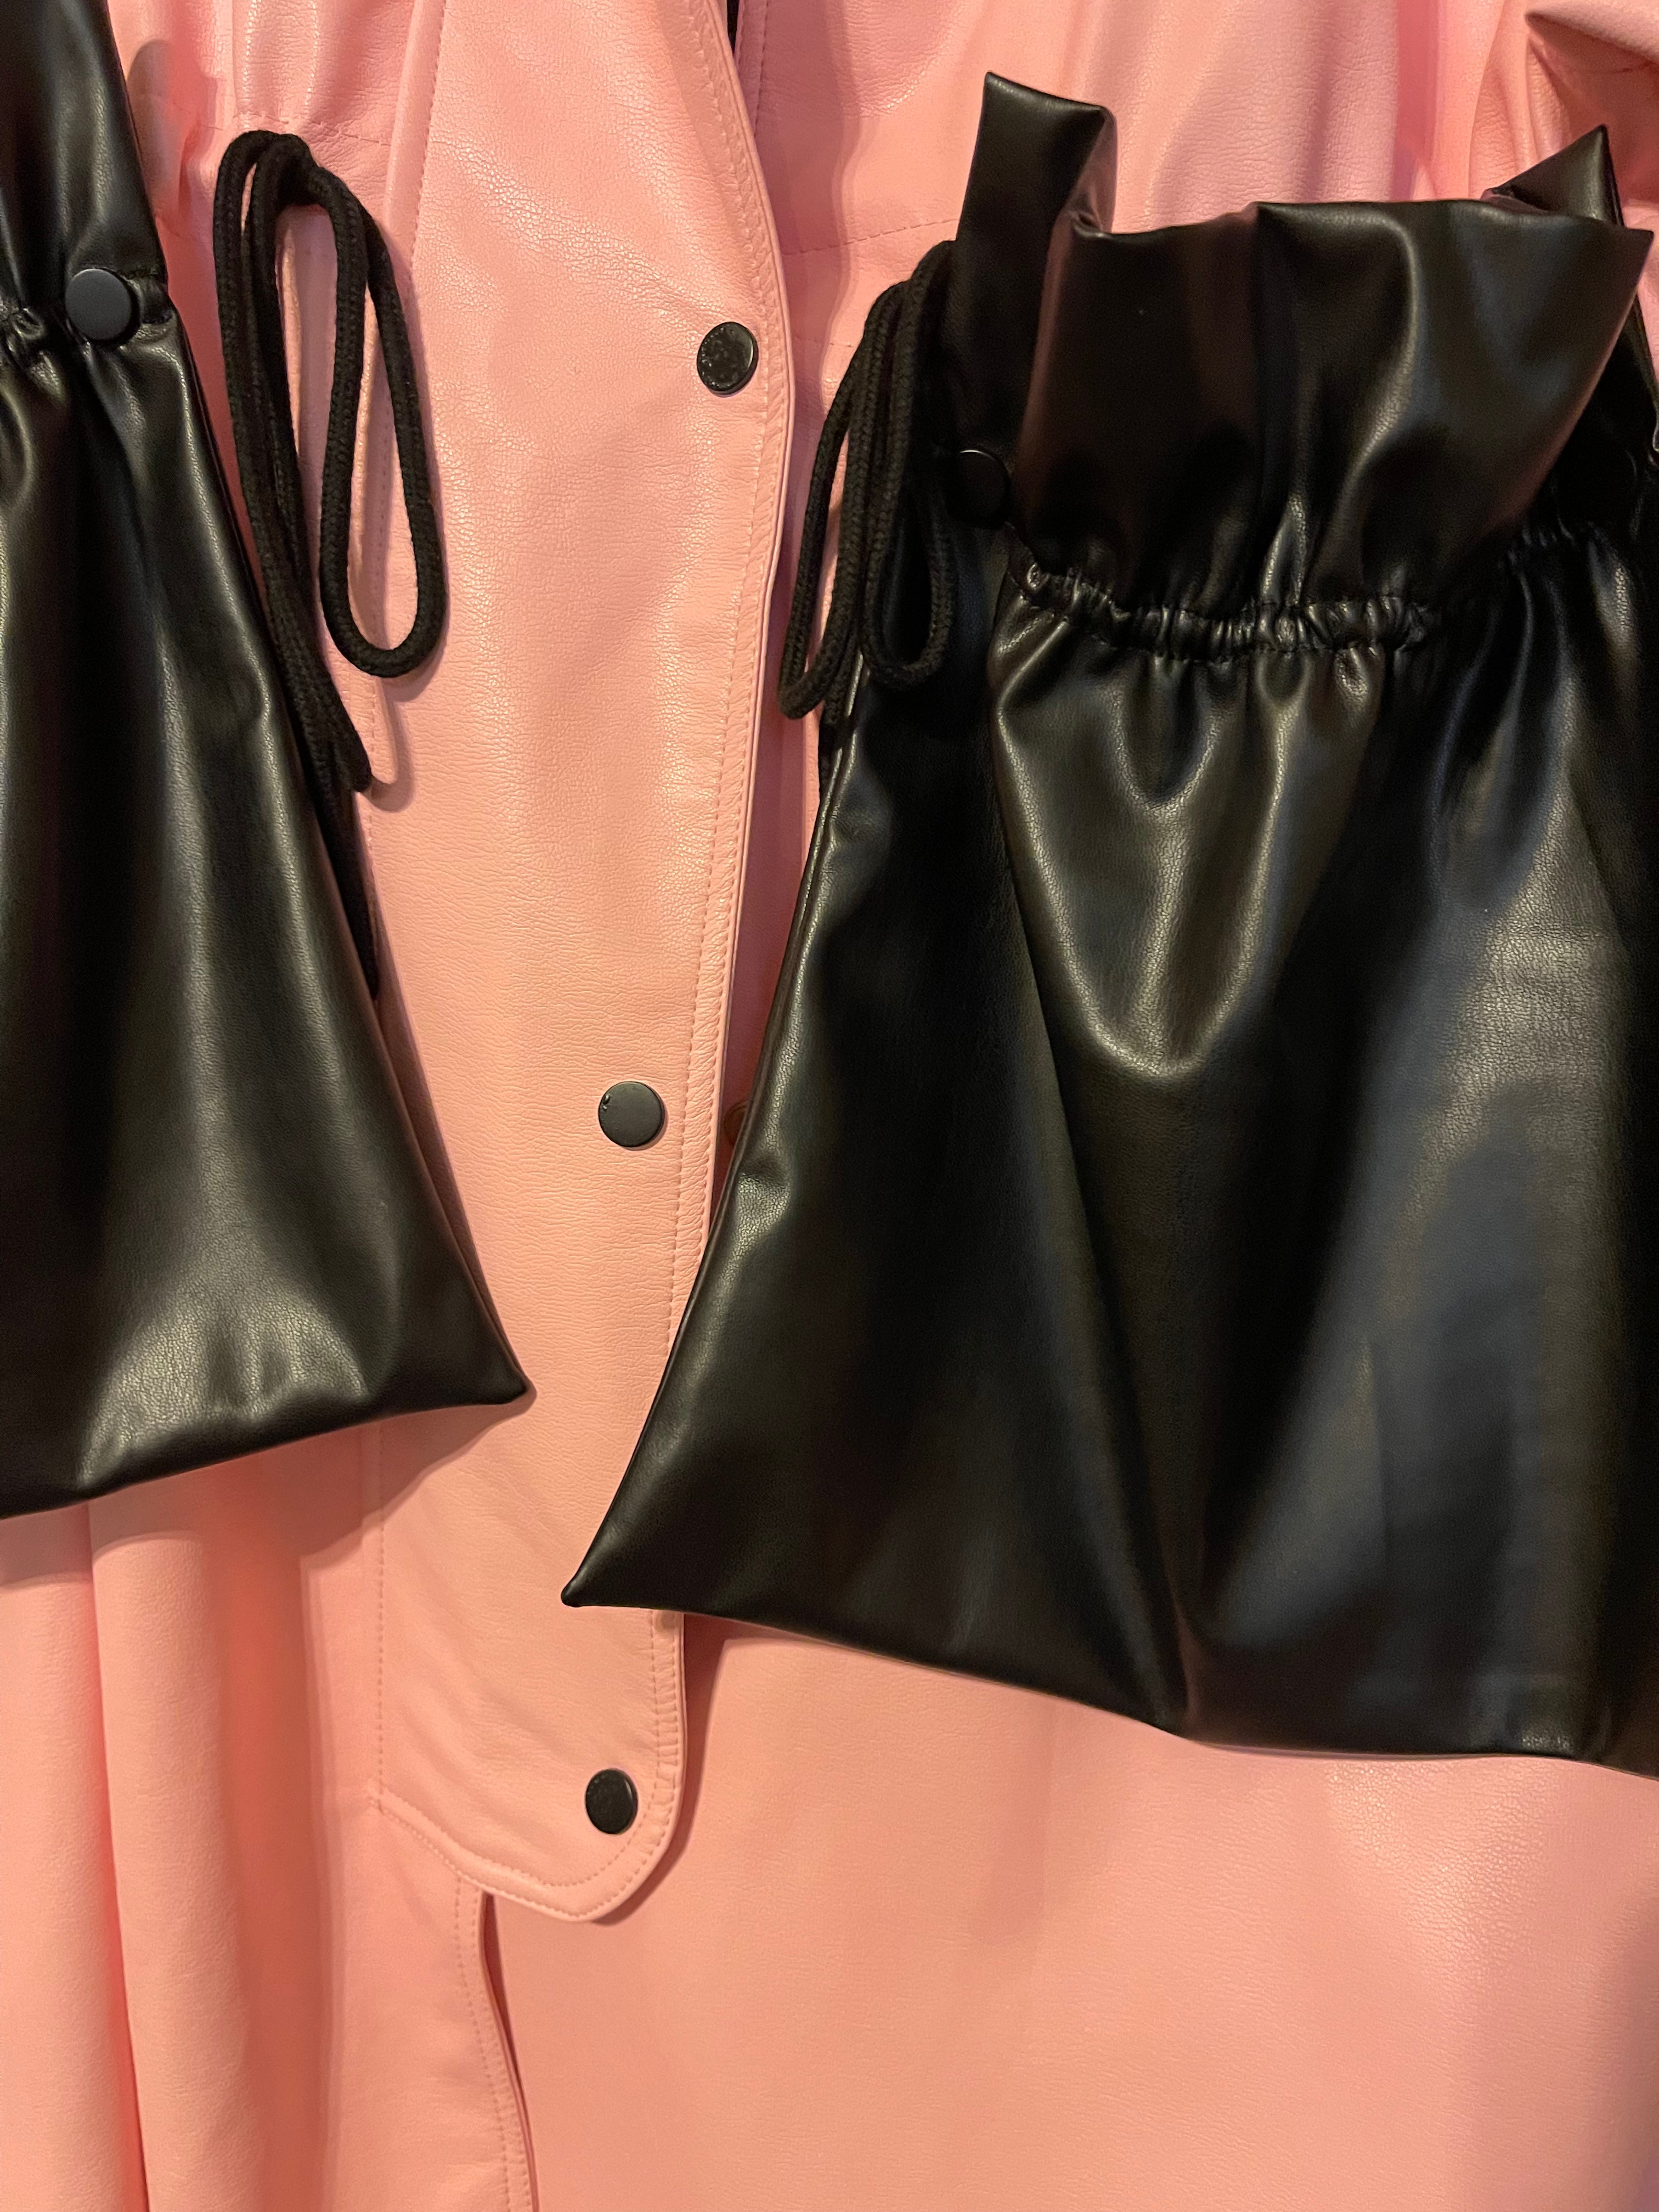 GOLDxTEAL pink vegan leather anorak trench coat. Gorgeous pink faux leather trench accented with oversized pockets.